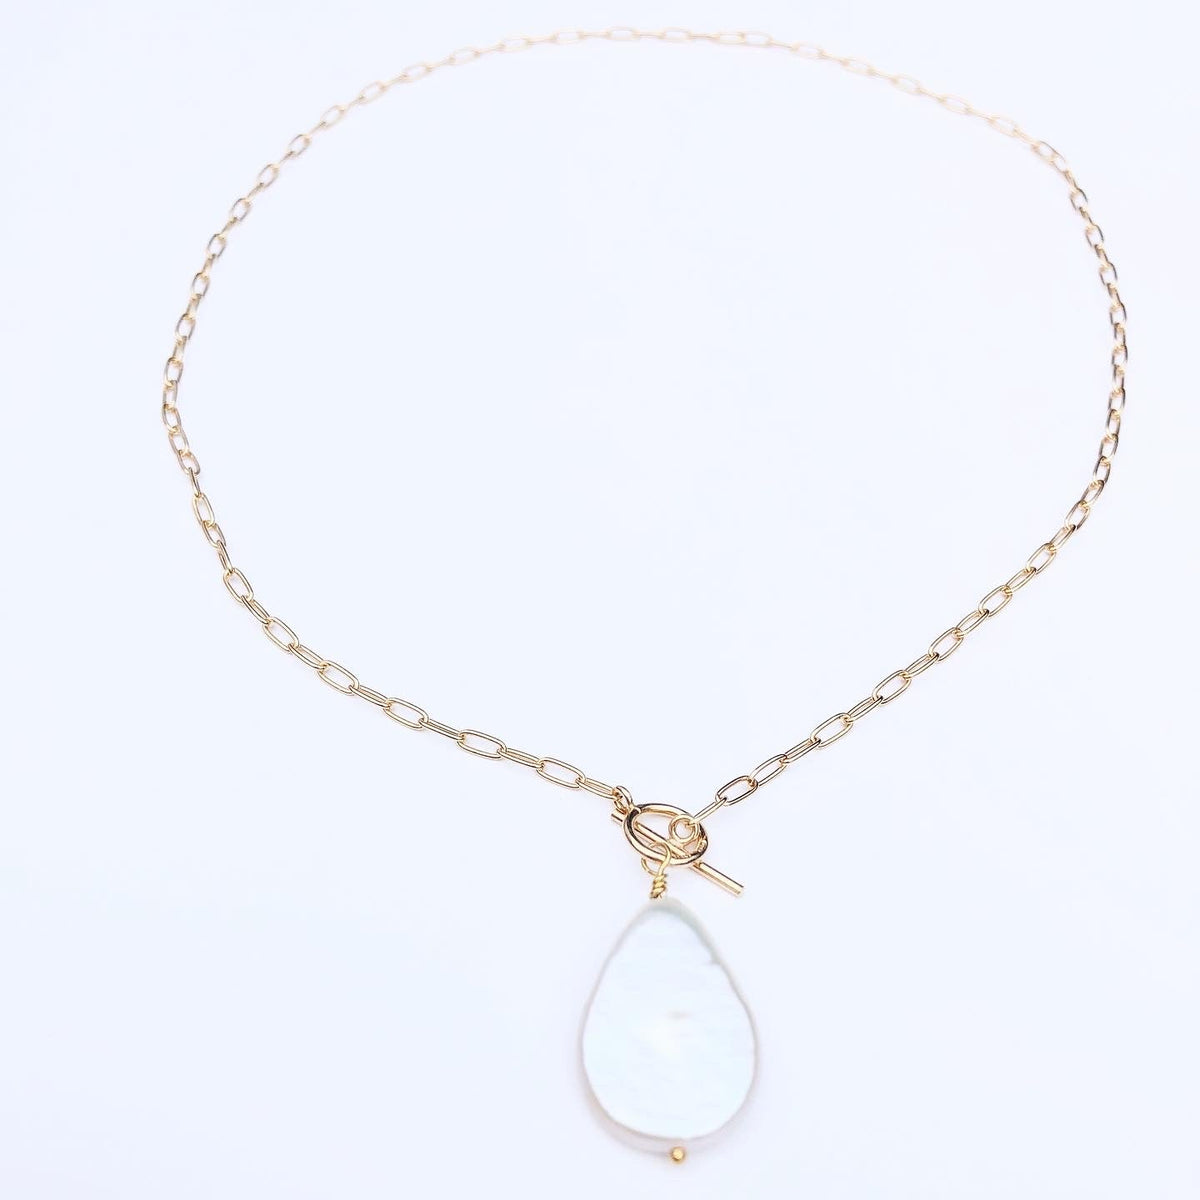 Free the Chains Necklace - Pearl Paperclip Chain Necklace